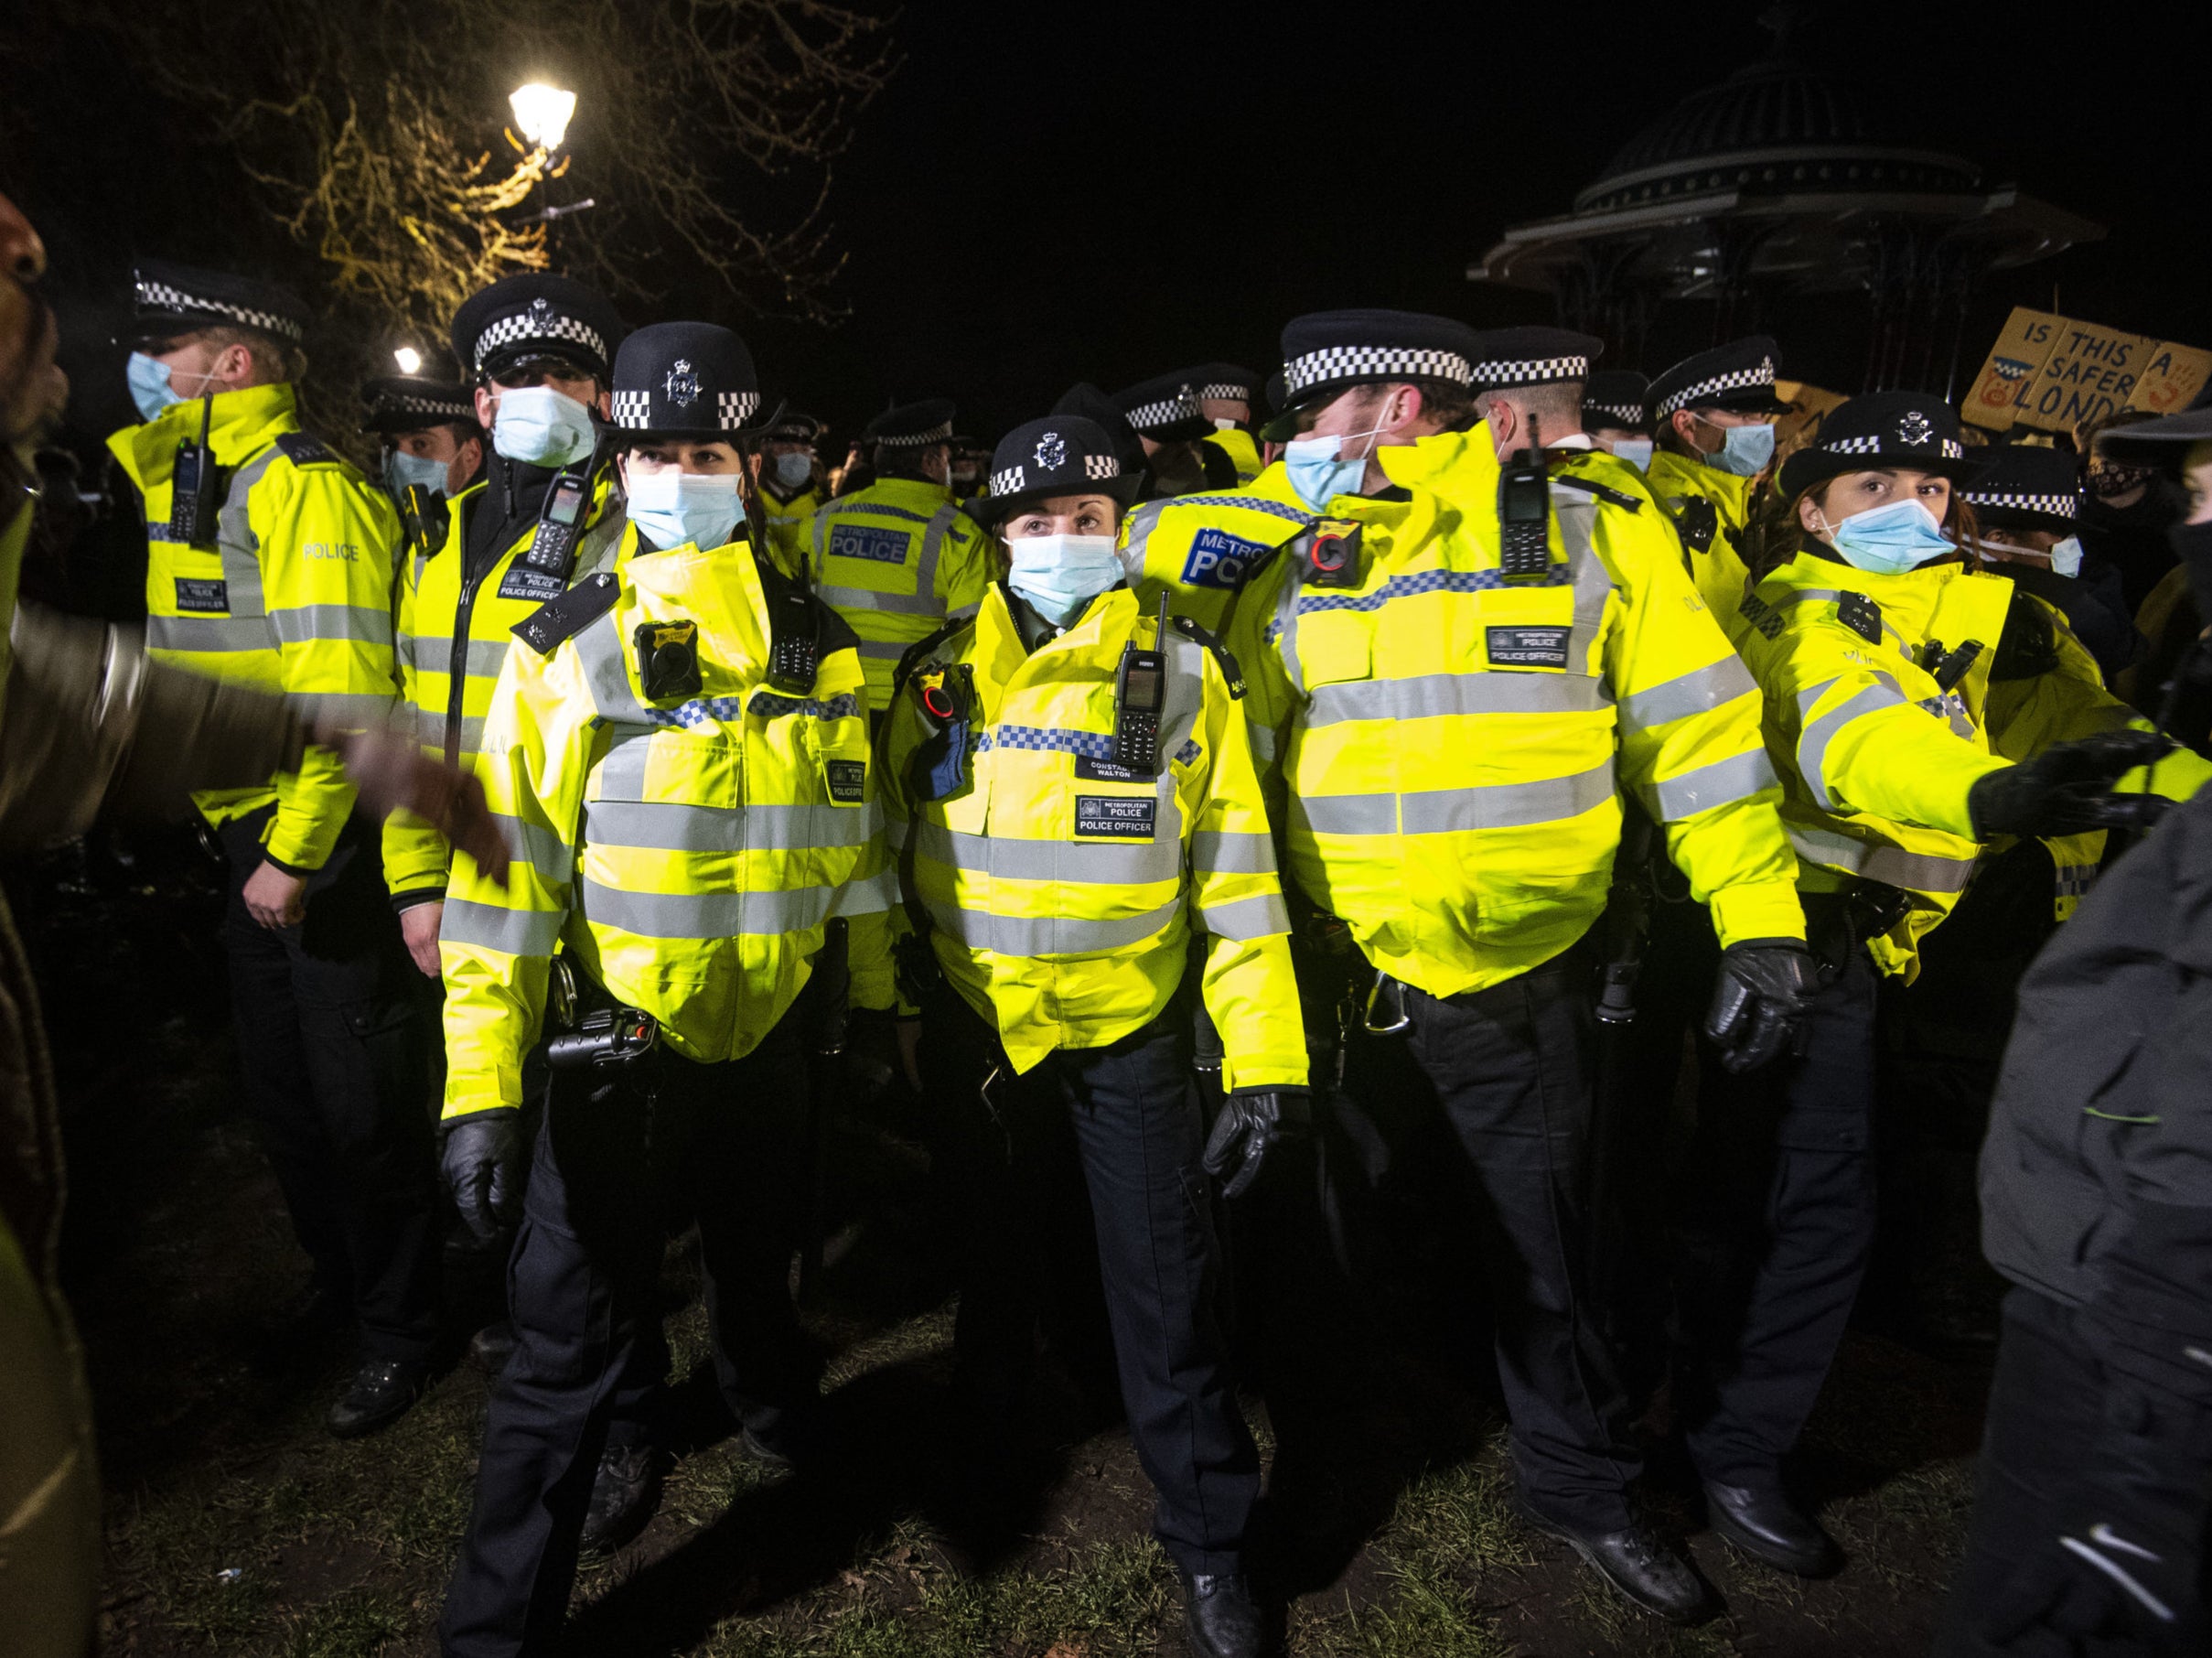 Police clash with people at the Sarah Everard vigil in Clapham Common, London